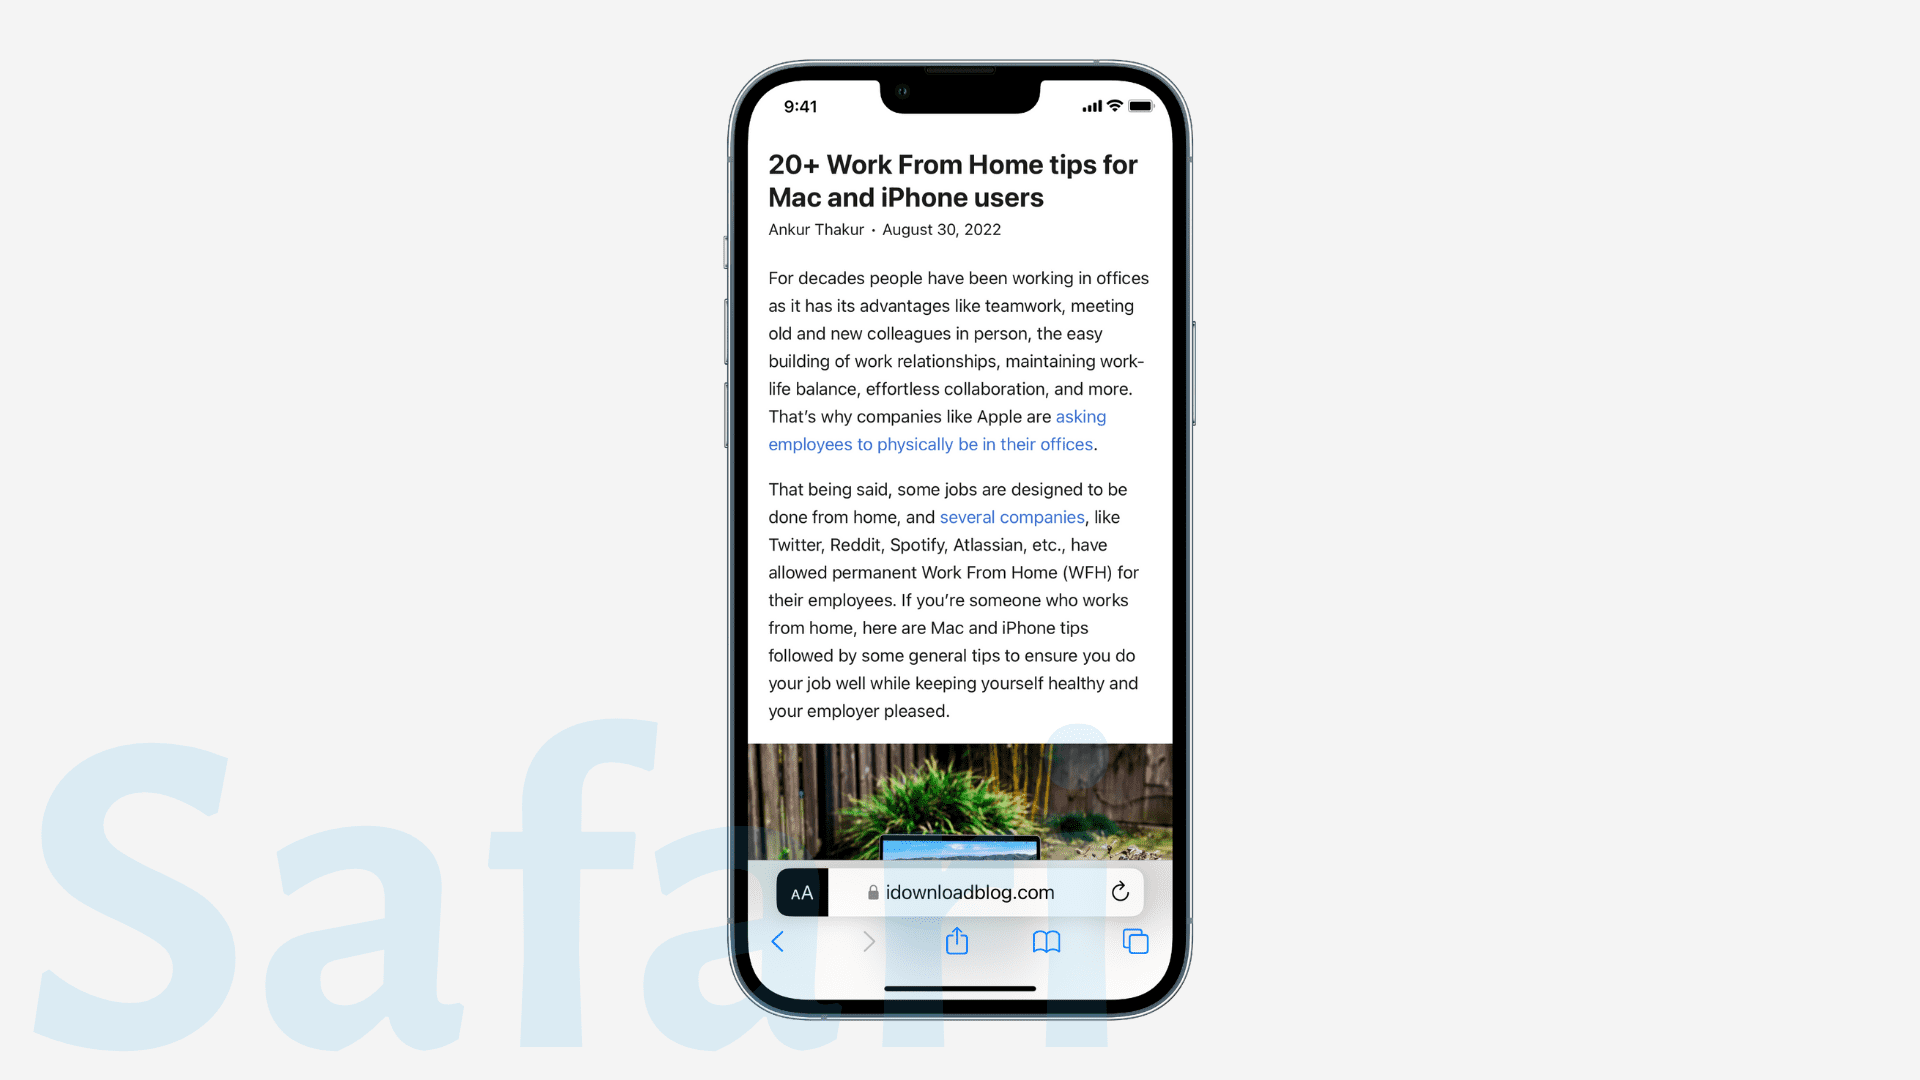 New features in Safari on iOS 16